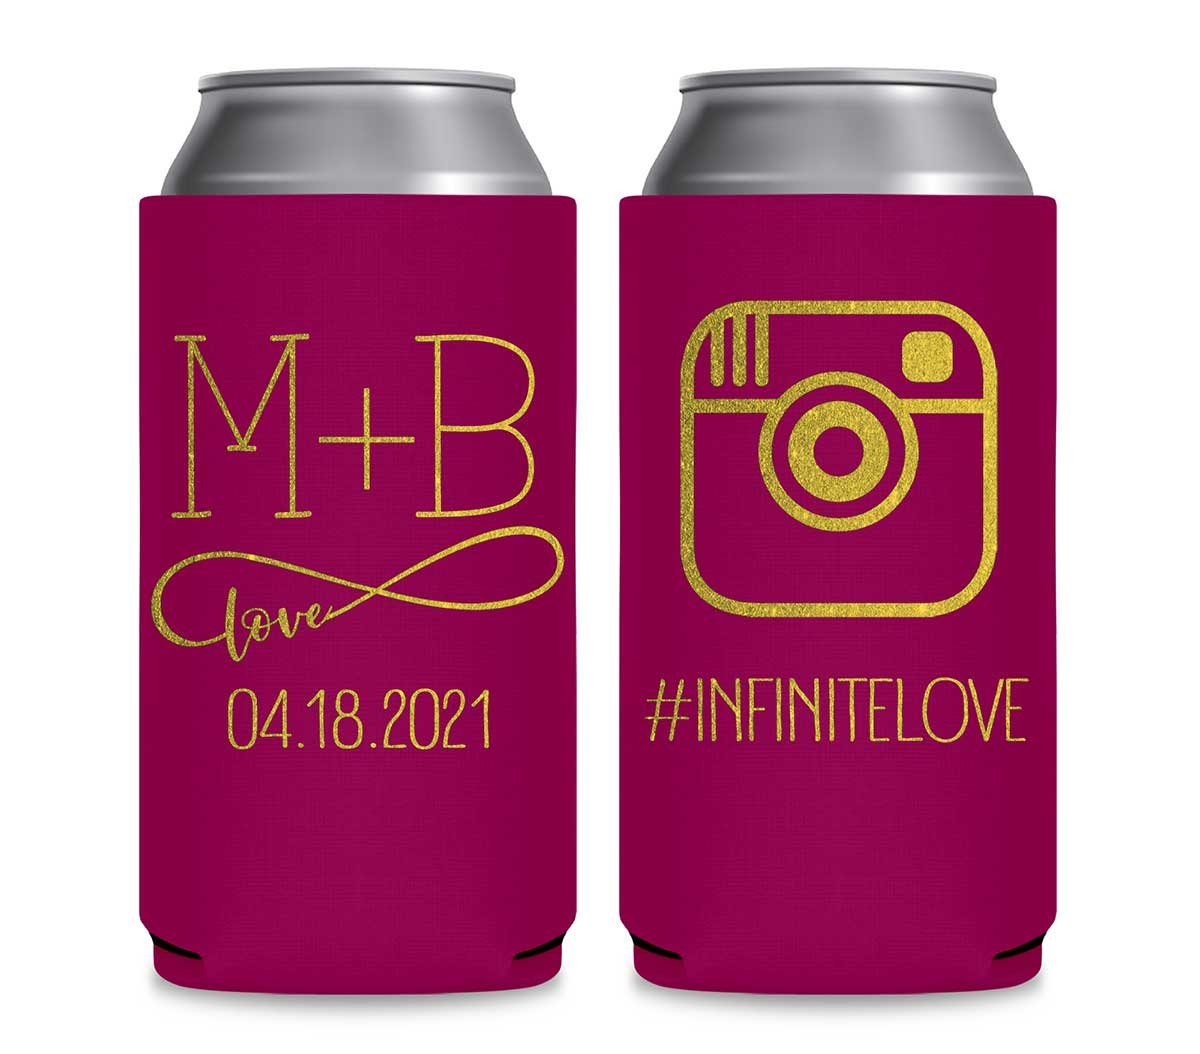 Infinite Love 1B Instagram Hashtag Foldable 12 oz Slim Can Koozies Wedding Gifts for Guests